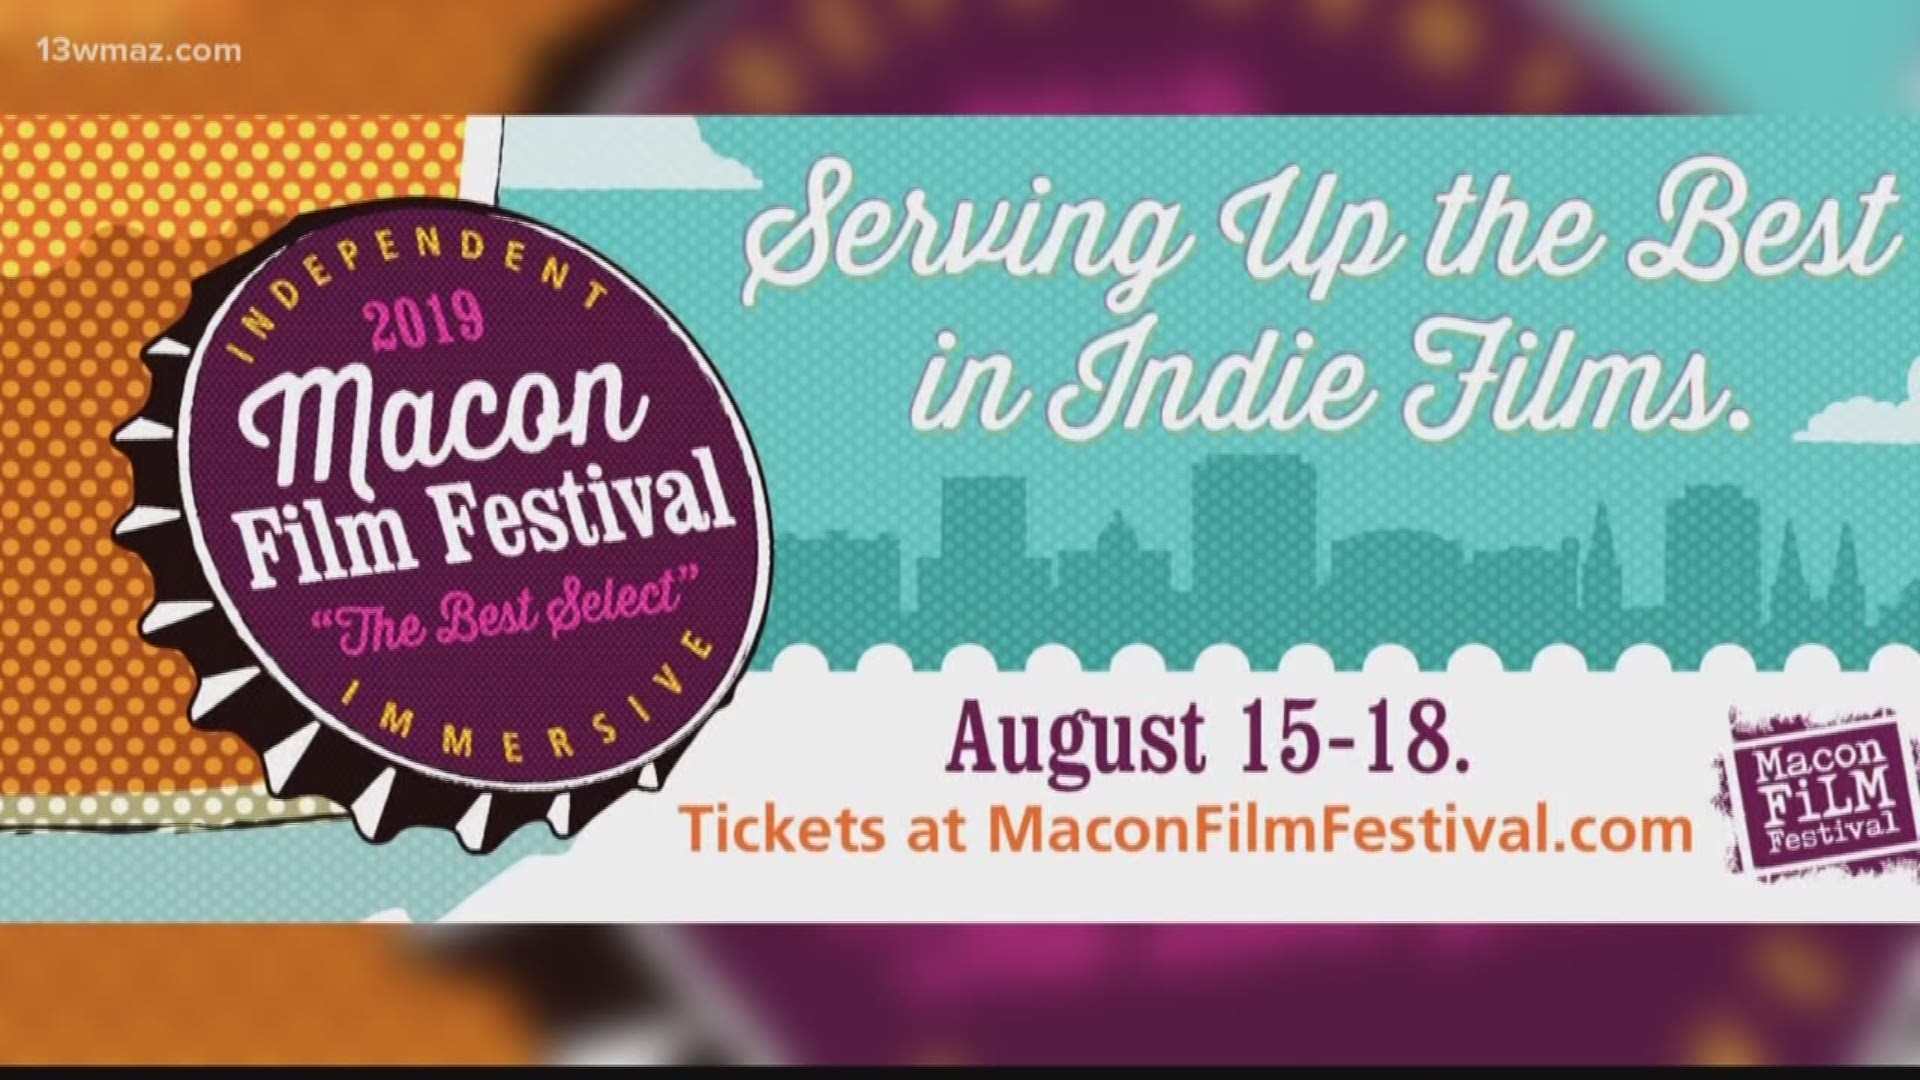 Check out some of the top events happening in Macon and Central Georgia!